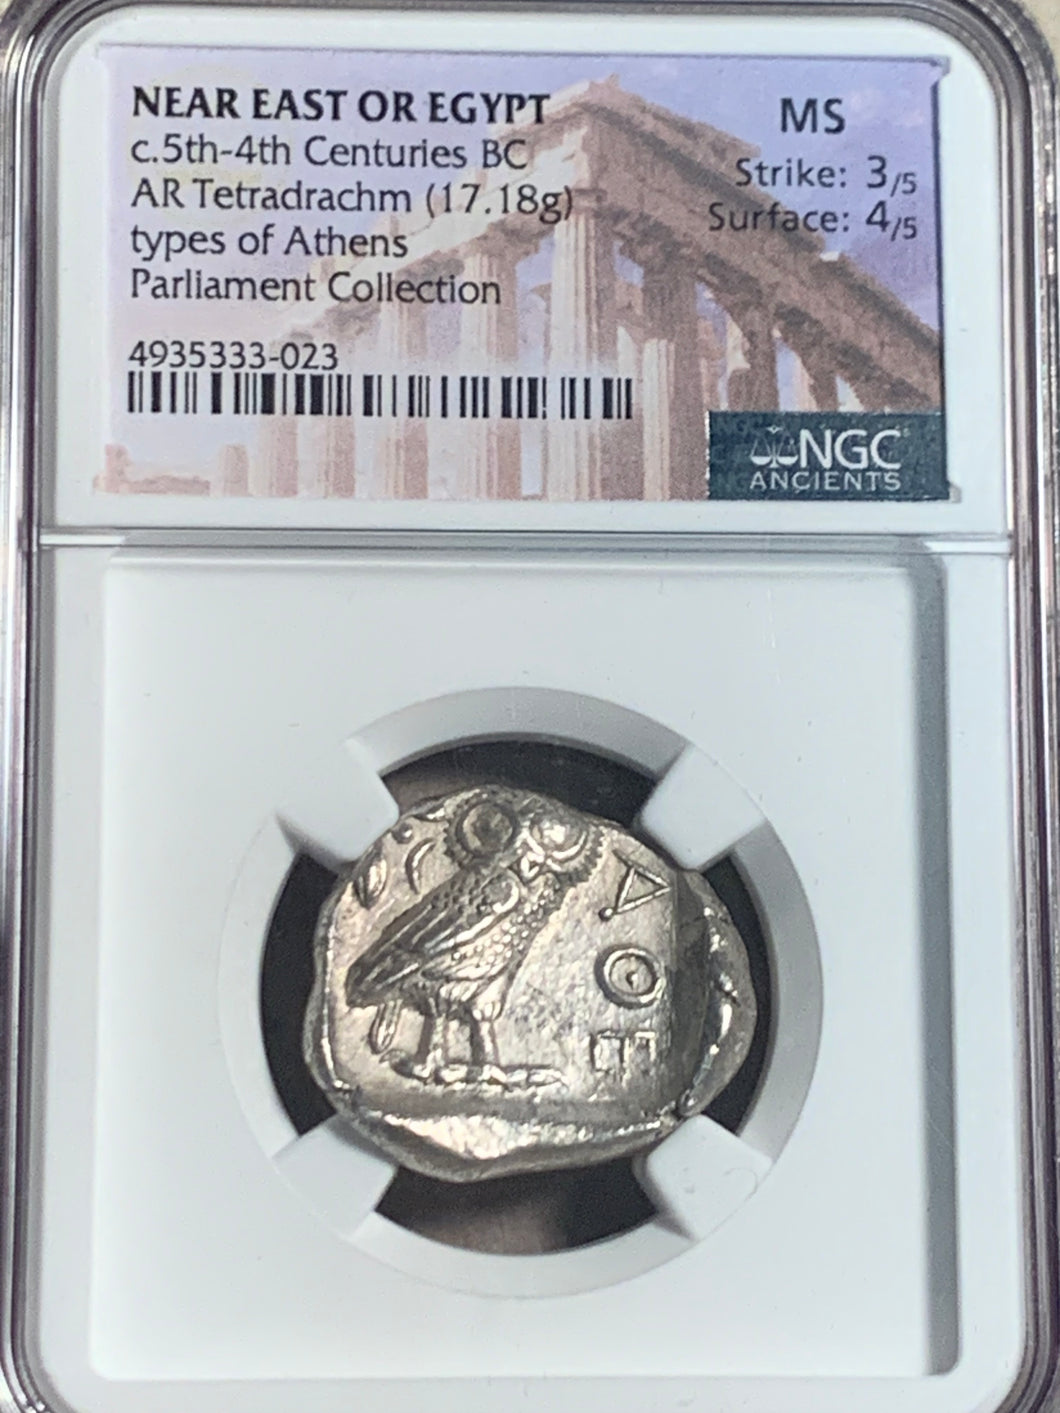 Silver Egyptian Struck Owl, 5th-4th century BC, Tetrdrachm, NGC Mint State strike 3/5, surface 4/5